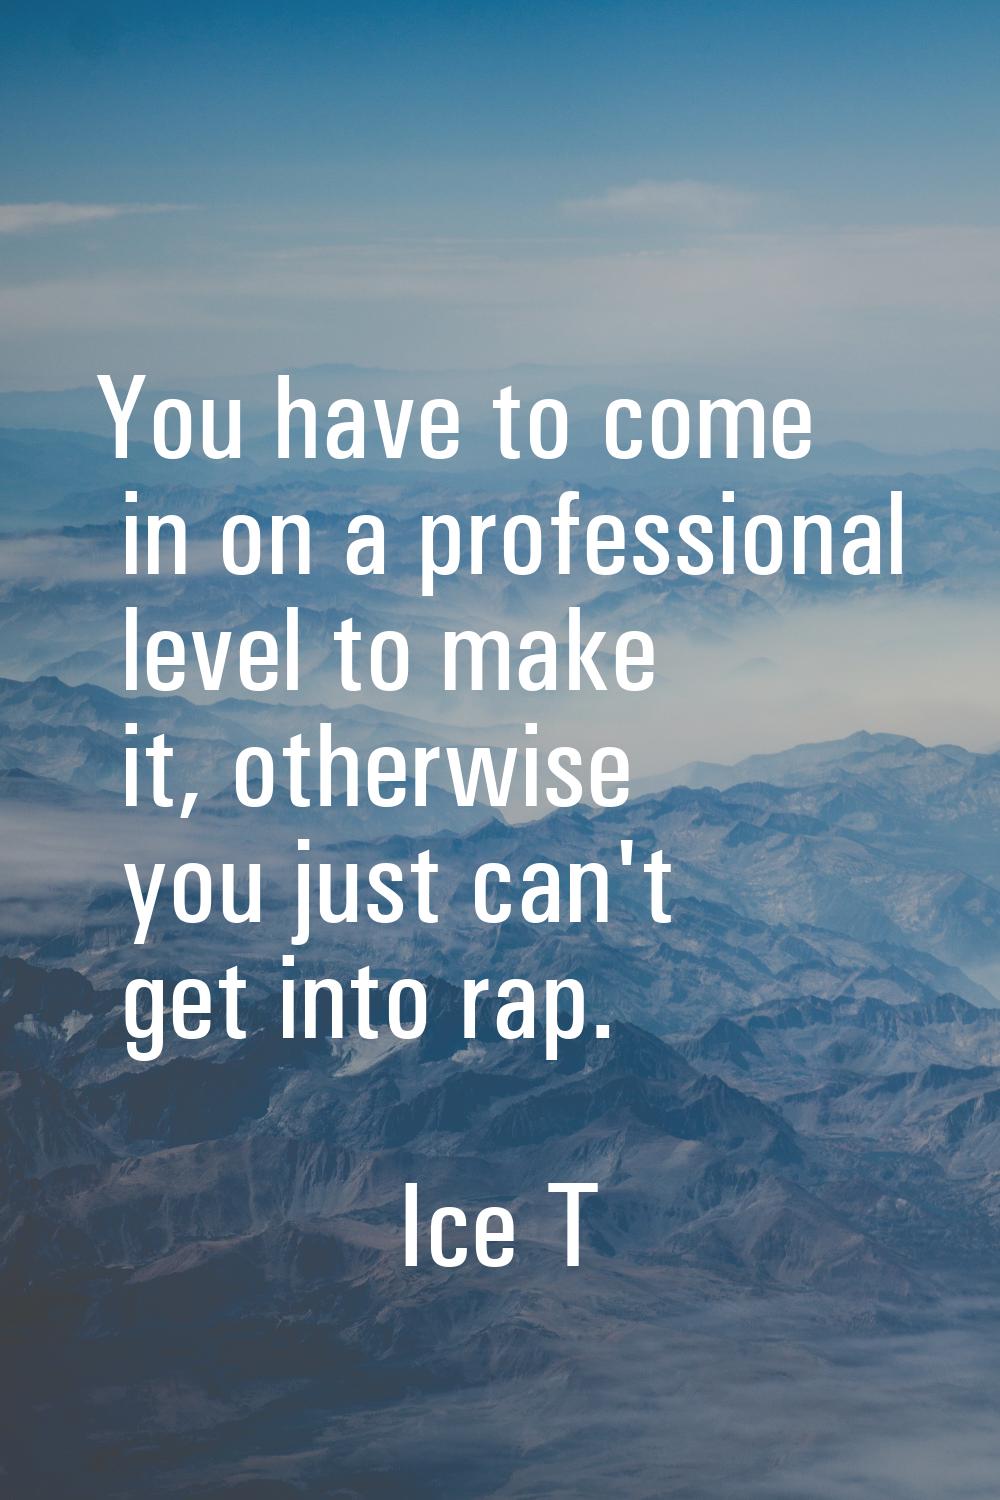 You have to come in on a professional level to make it, otherwise you just can't get into rap.